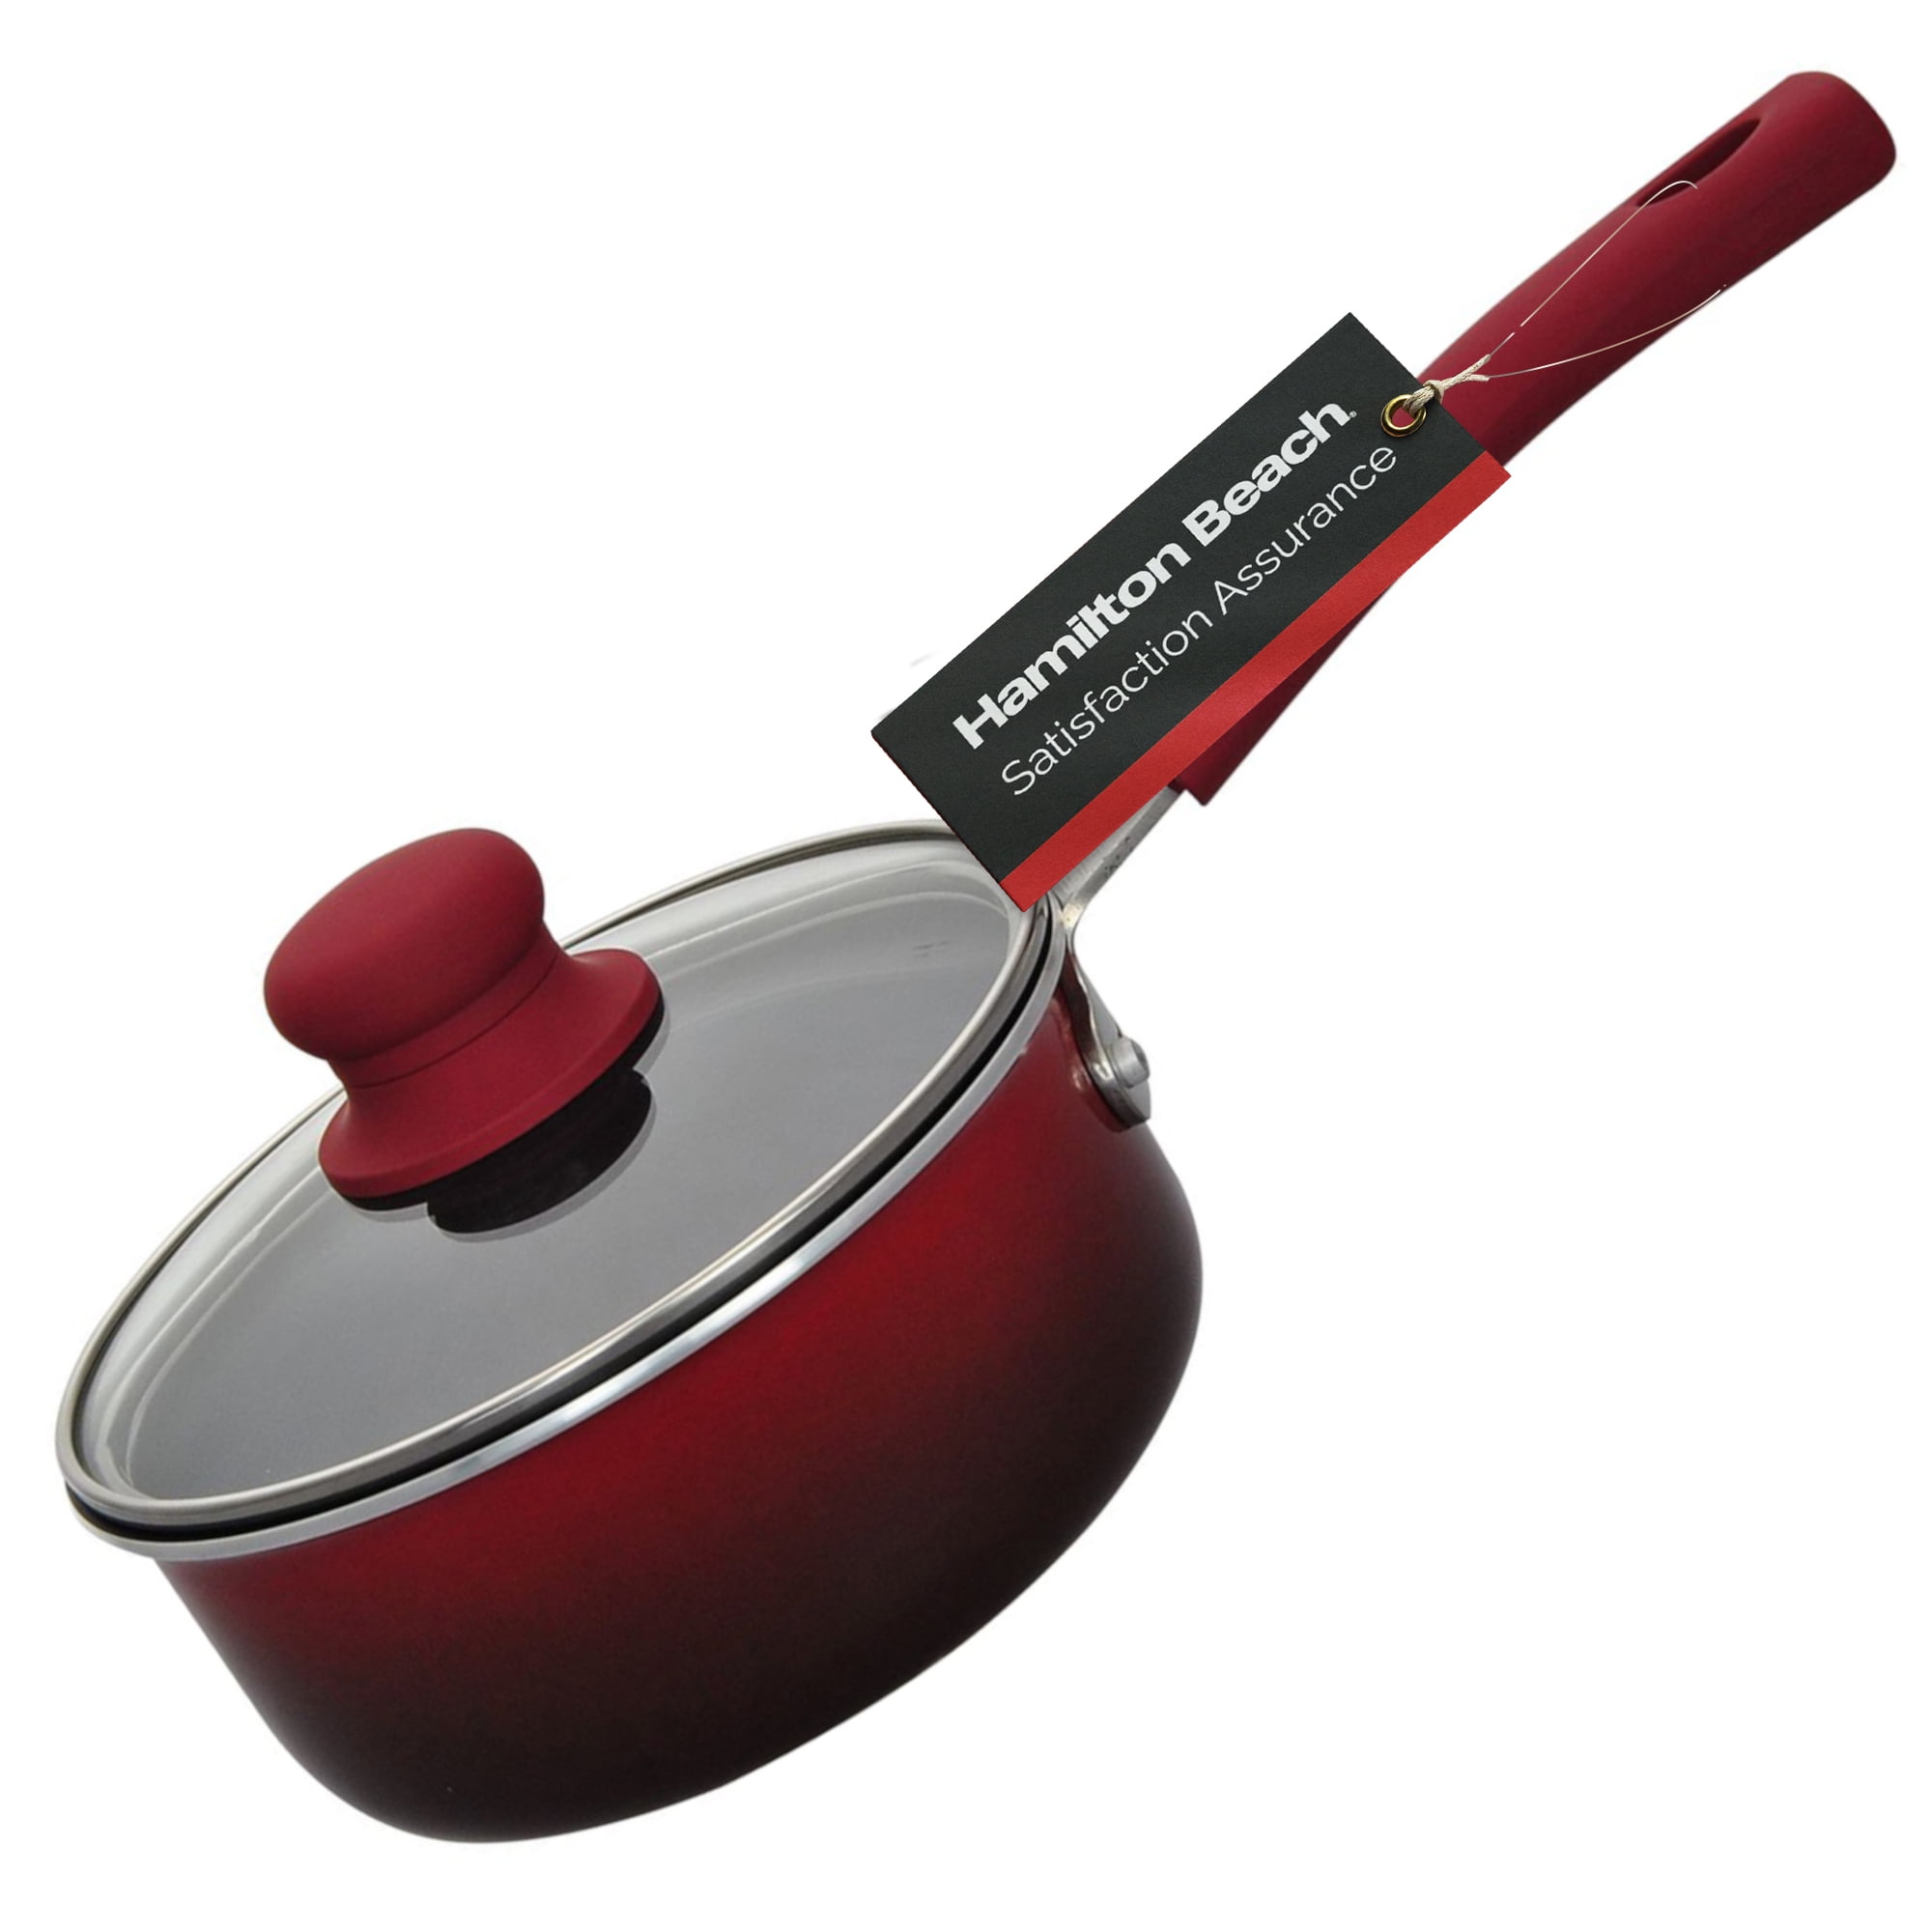 DELARLO Tri-Ply Stainless Steel Small Saucepan with Lid, Induction Cooking Sauce Pot Sauce Pans, Heavy Bottom Saucier Pot Cookware, Dishwasher Safe